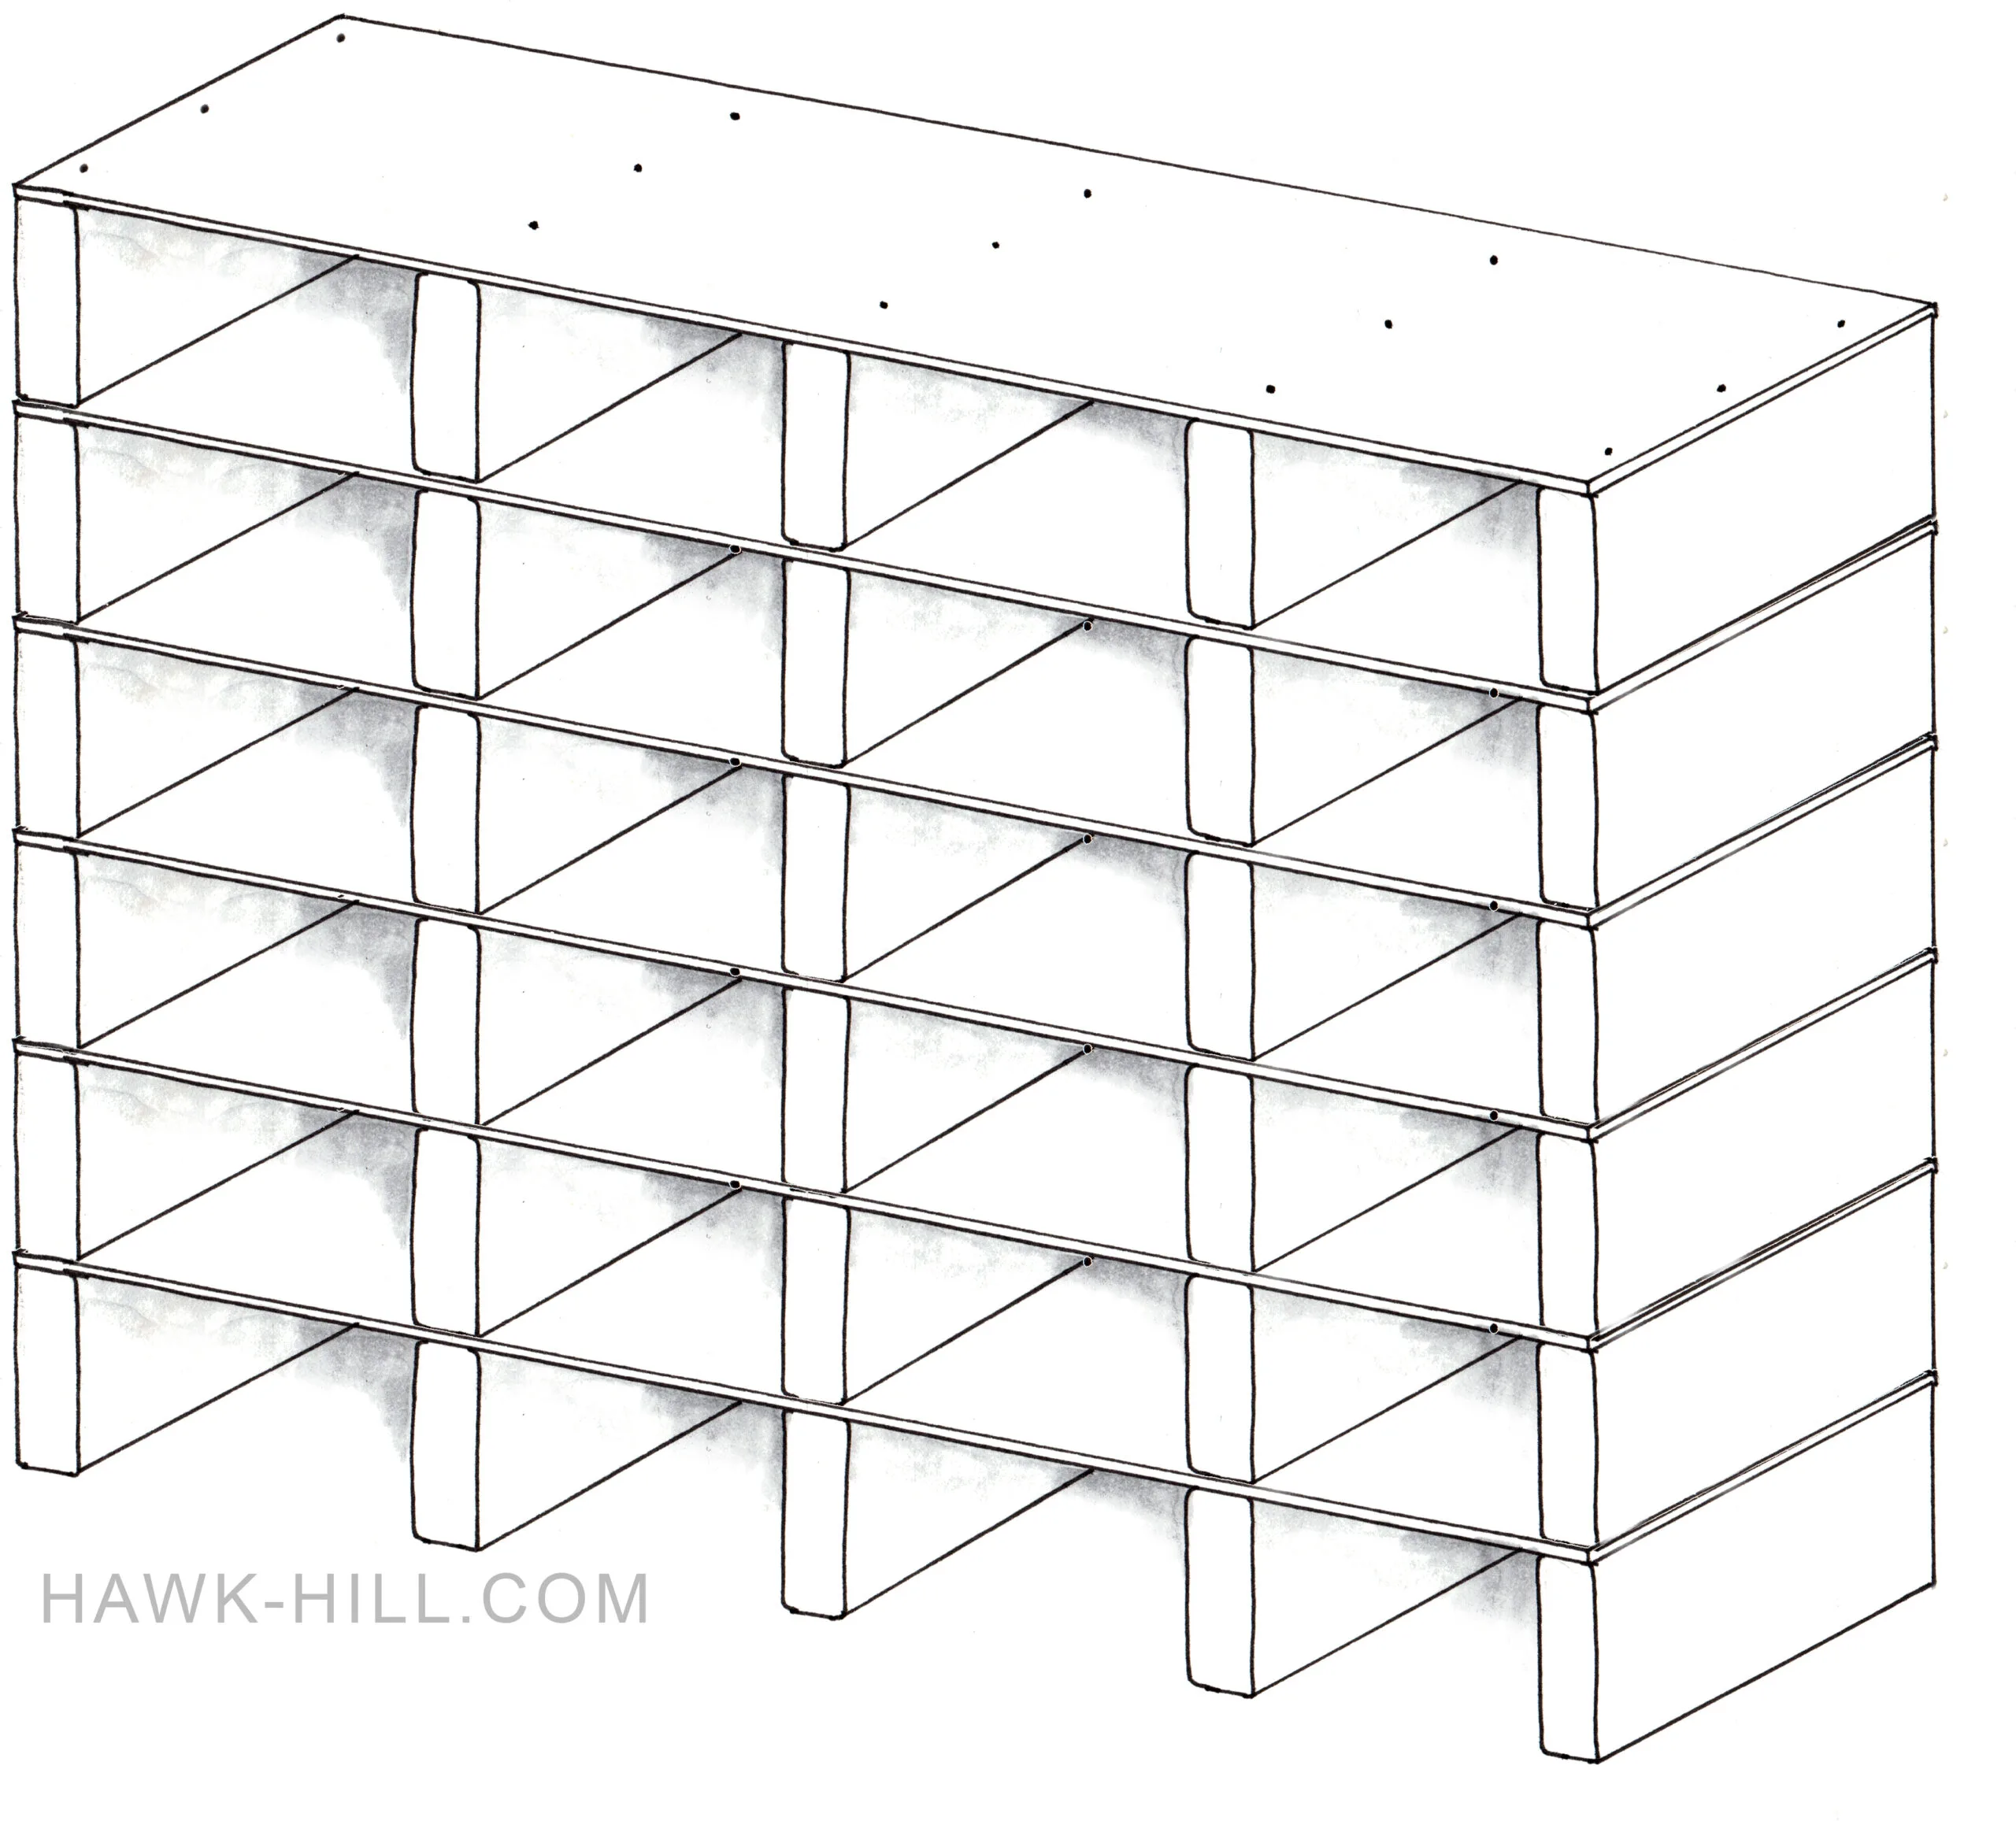 individual shelfs stacked on top of each other.